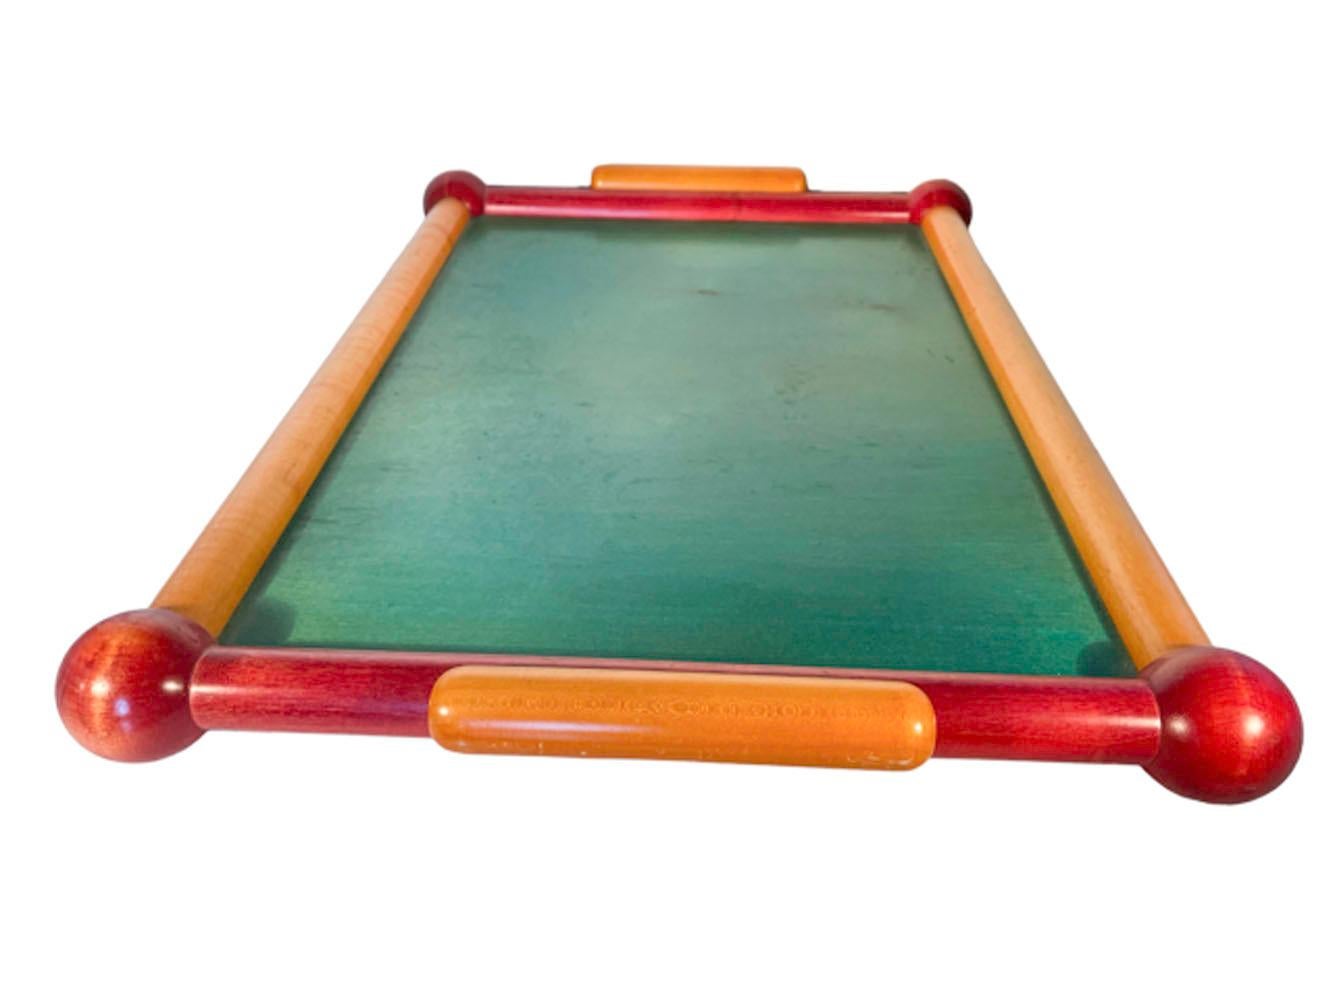 Hand crafted stained hardwood serving tray. Handcrafted in Bergamo, Italy using translucent colored stains on select hardwoods and incorporating geometric forms to create the frame, feet and handles. Marked on the bottom 